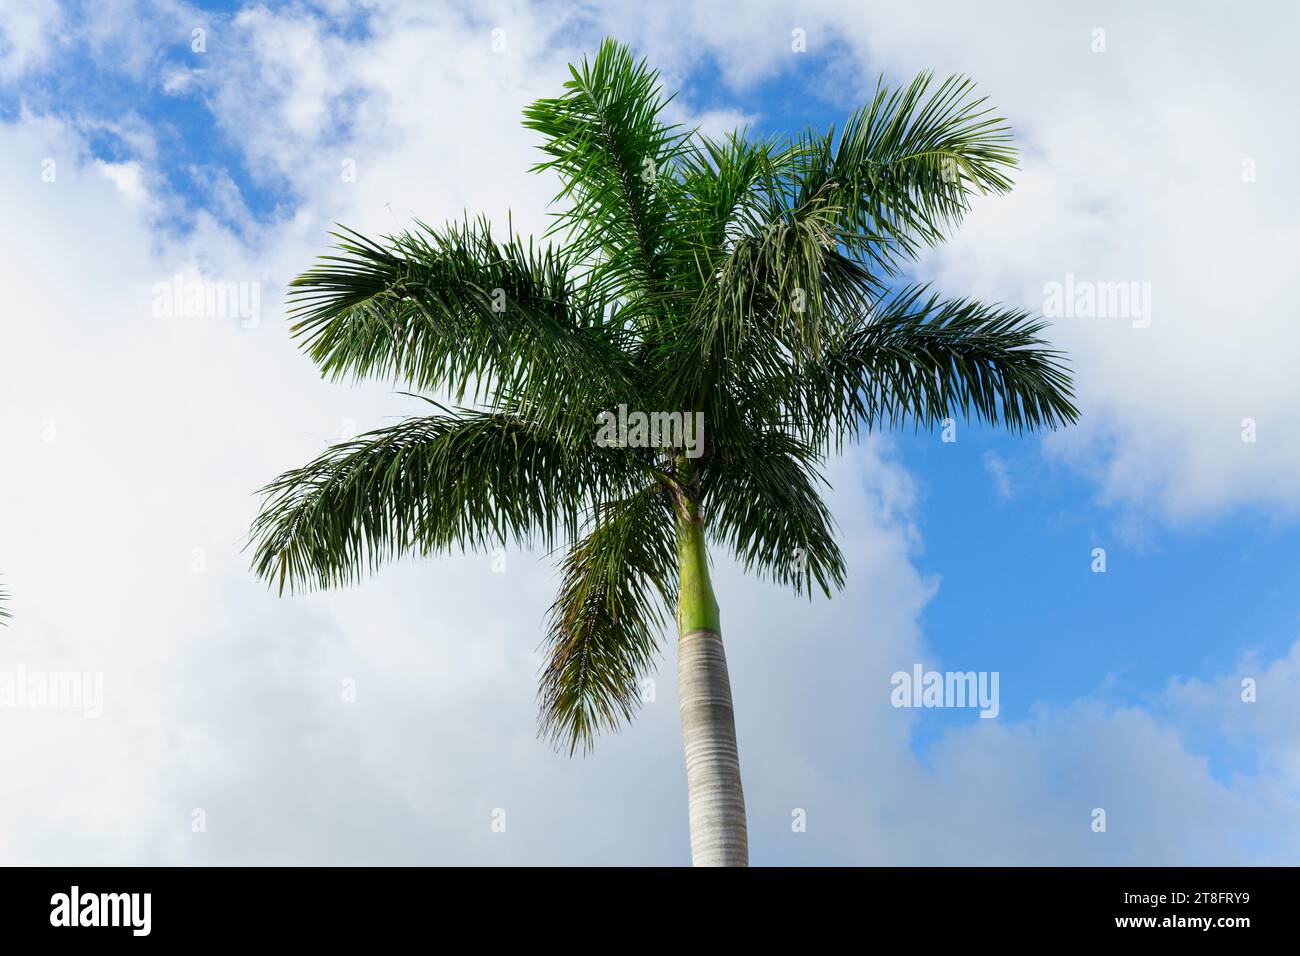 Close-up of a coconut palm tree against blue sky with white clouds horizontal image Stock Photo